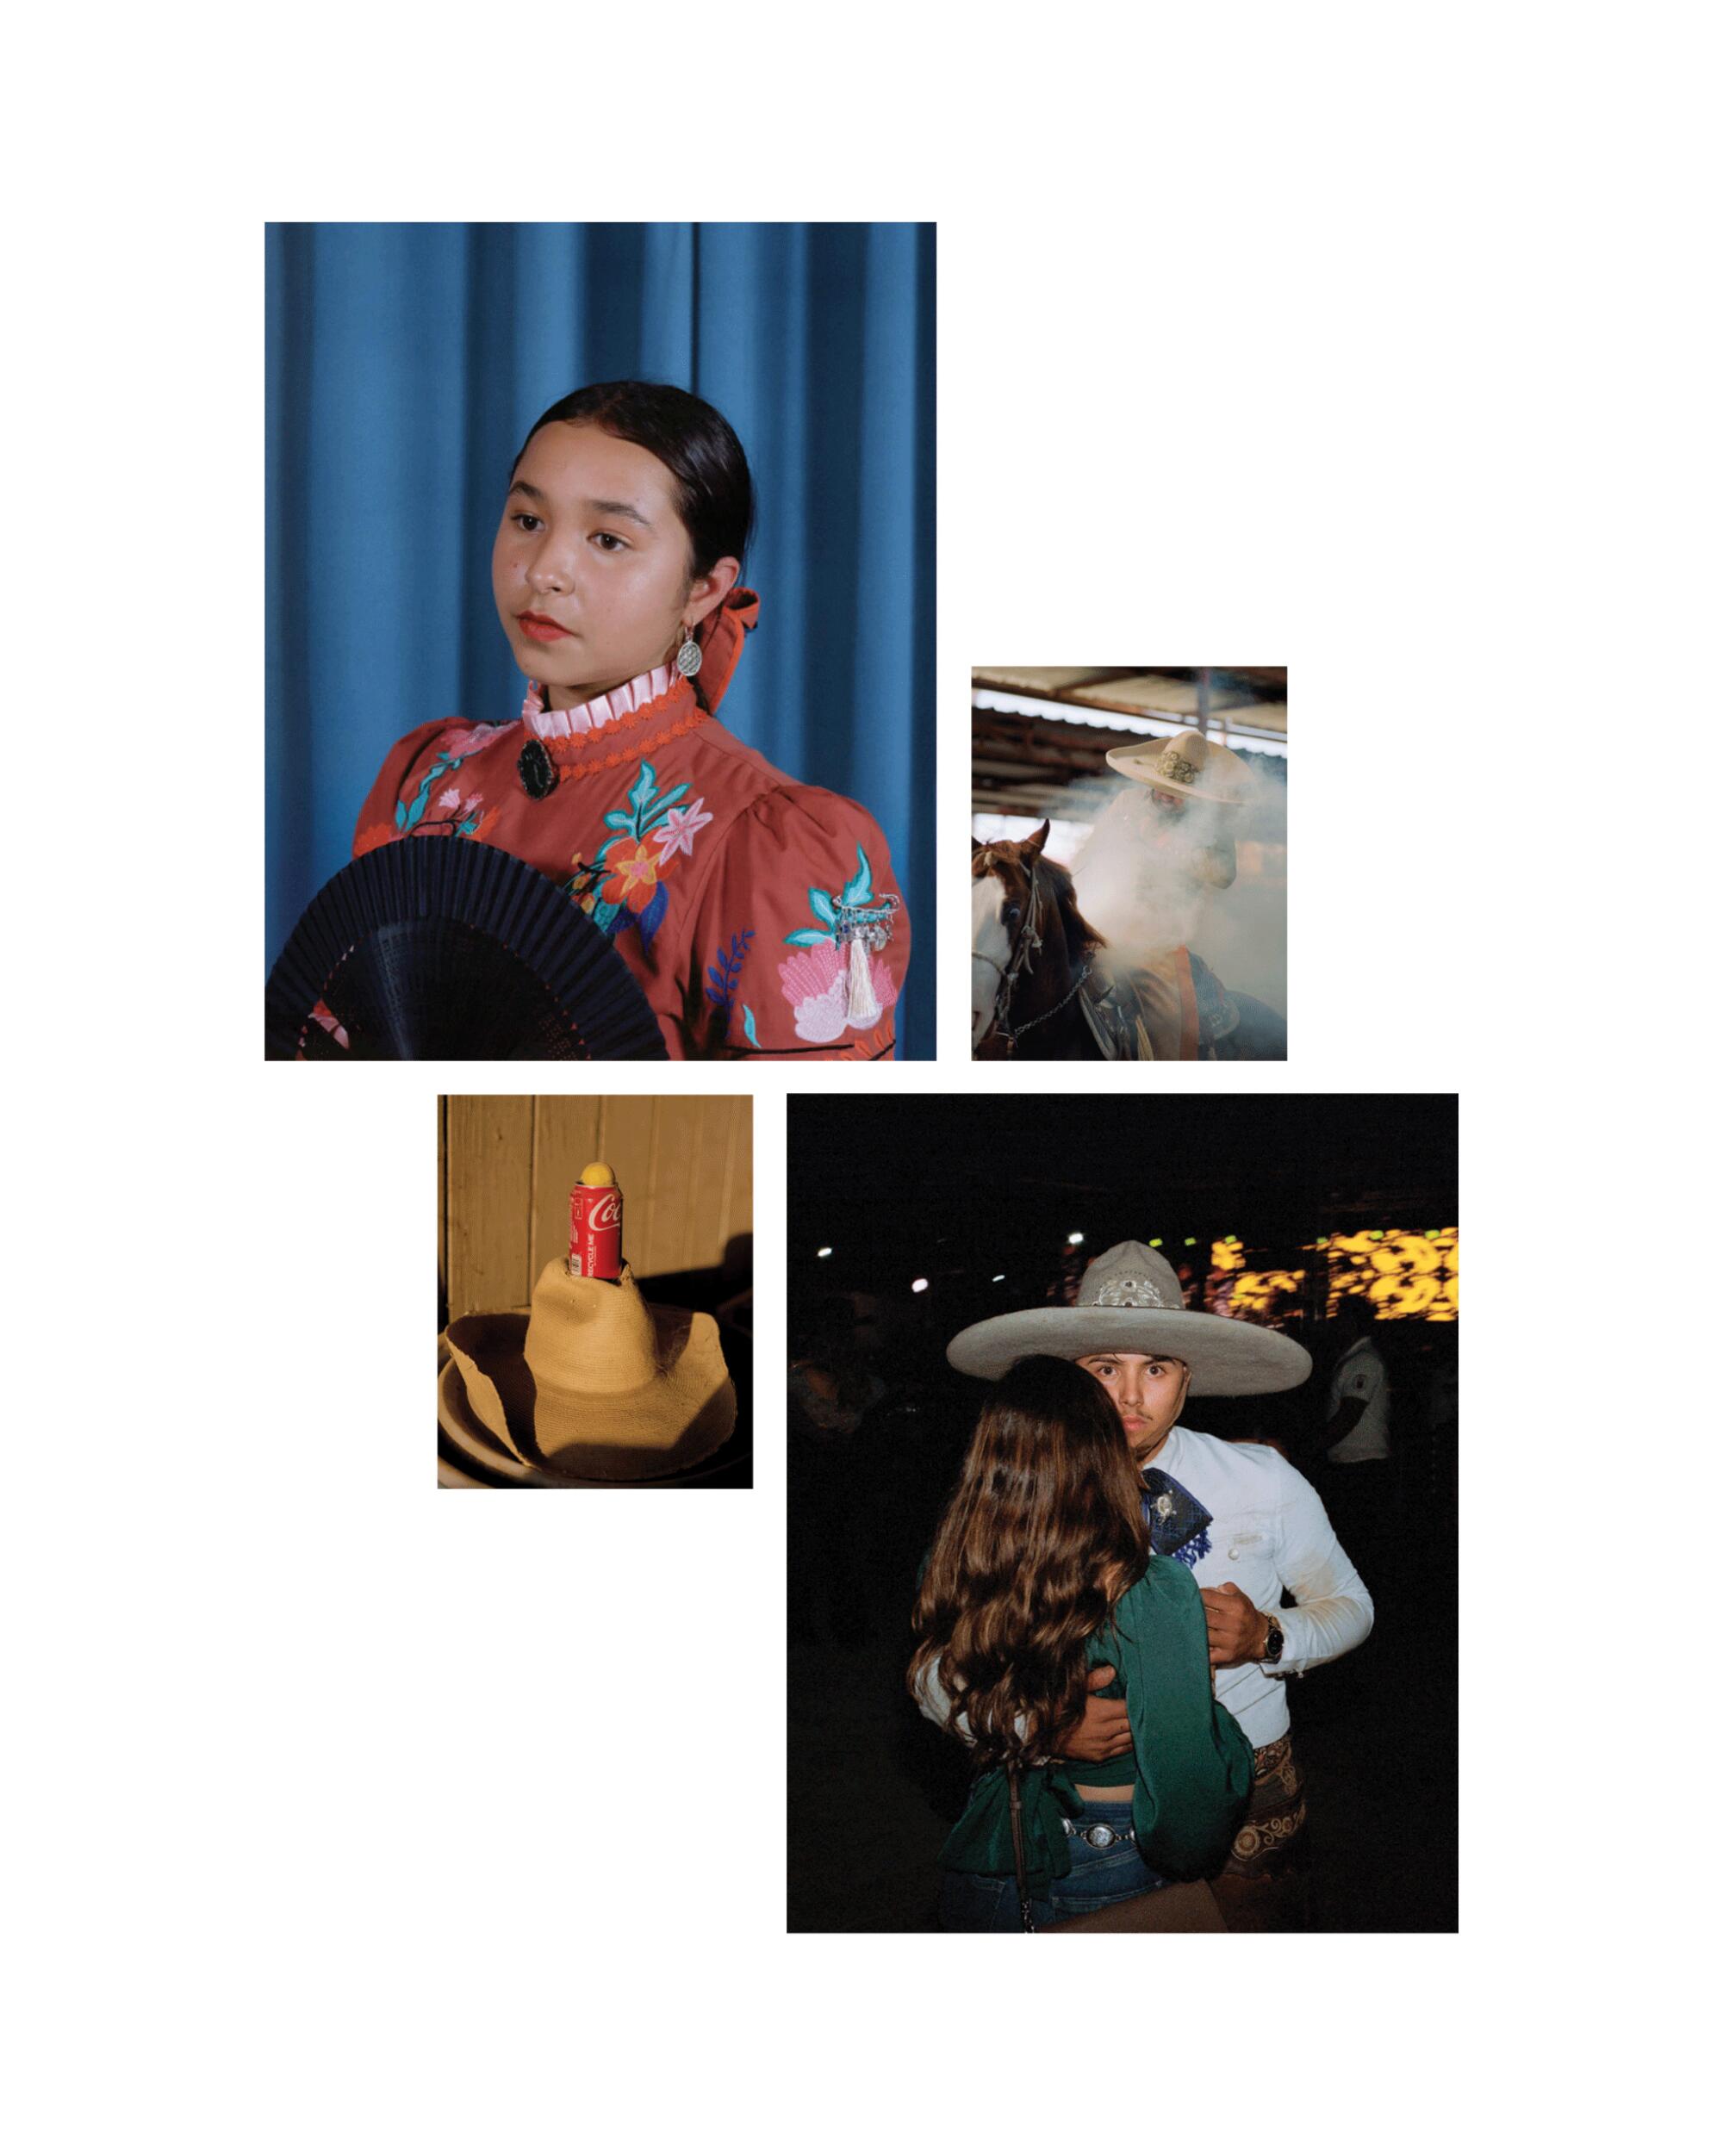 A gif of photographs of a girl, a man in a cowboy hat, a man riding a horse and a hat with a soda can.